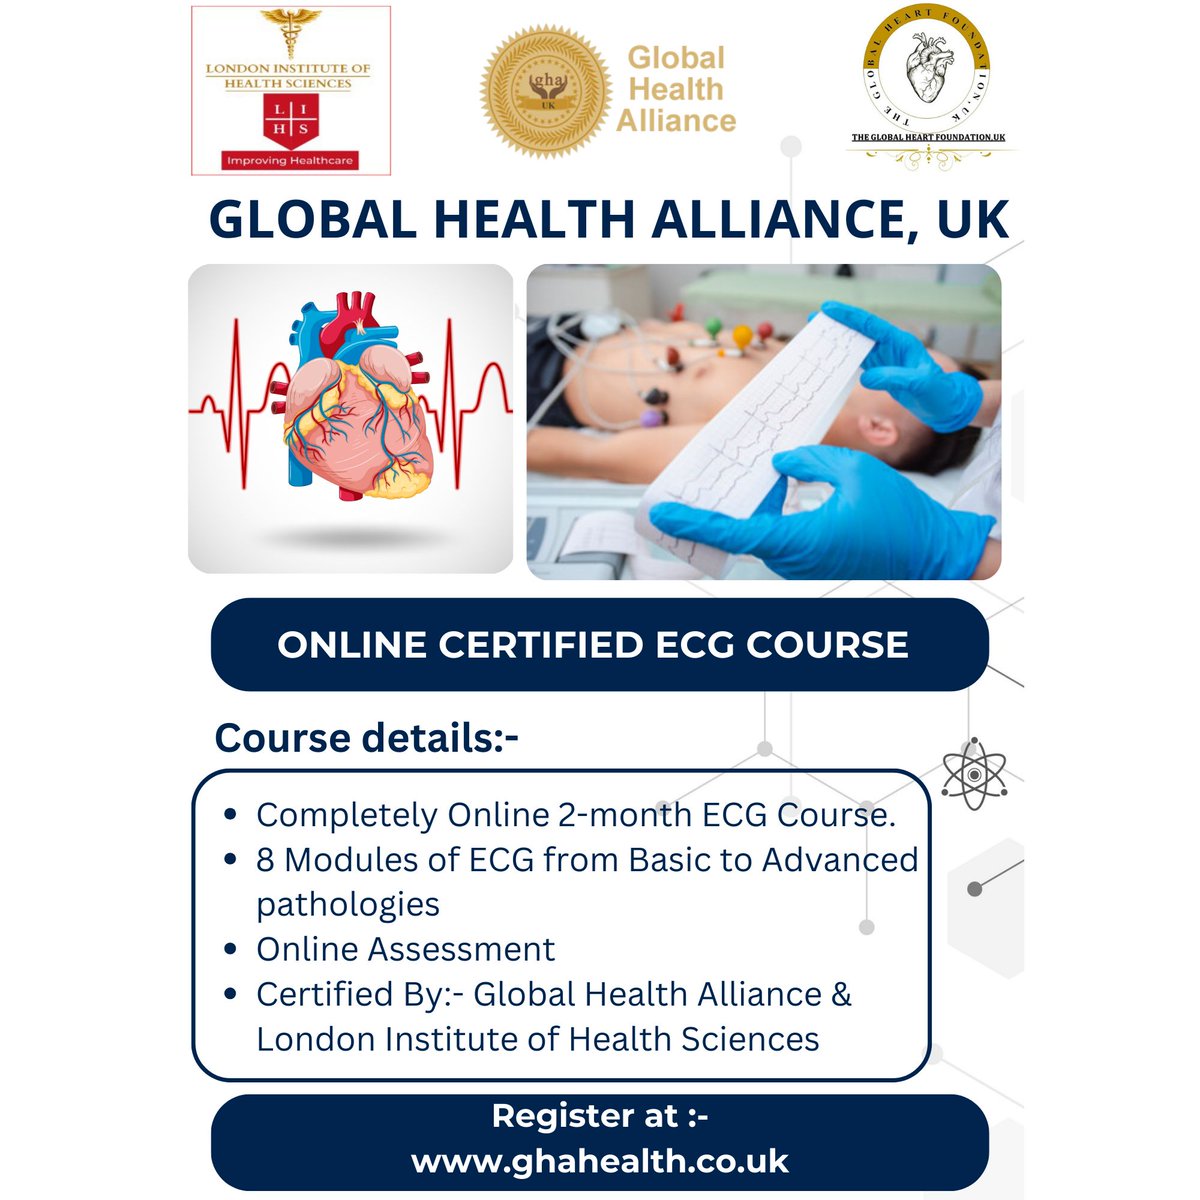 UK Online Certified ECG Course Register At:- ghahealth.co.uk Email :- info@ghahealth.co.uk #Cardiology #Electrocardiogram #Physicians #GPs #CriticalCare #medtwitter #cardiotwitter #ECG #Medical #hospitals #ccu #nursing #bbc #GHA #Course #doctor #MedTwitter